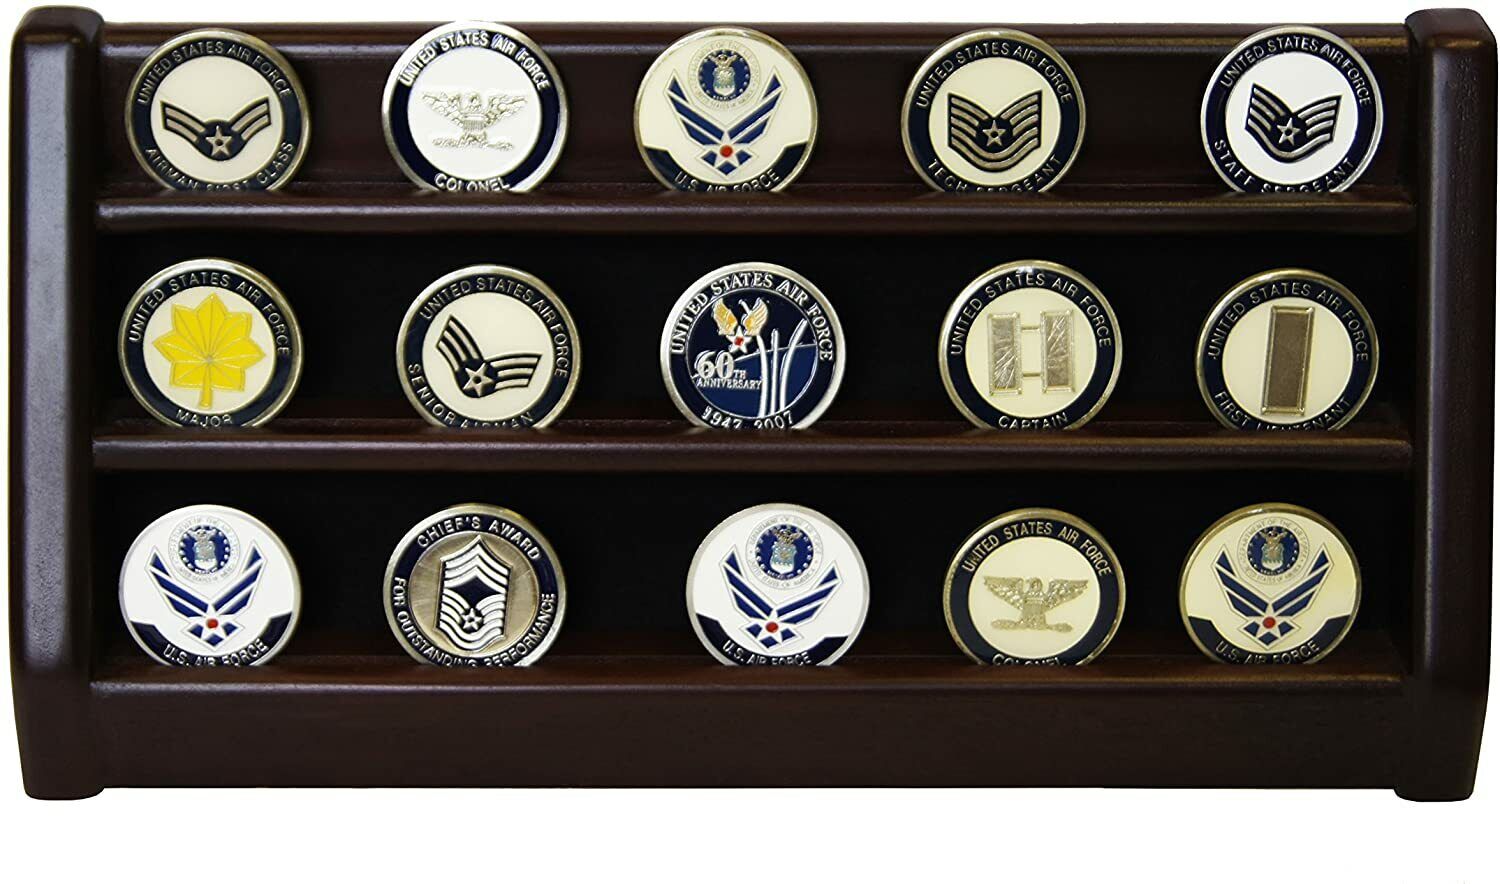 DECOMIL - 3 Rows Shelf Challenge Coin Holder Display Casino Chips Holder Solid 